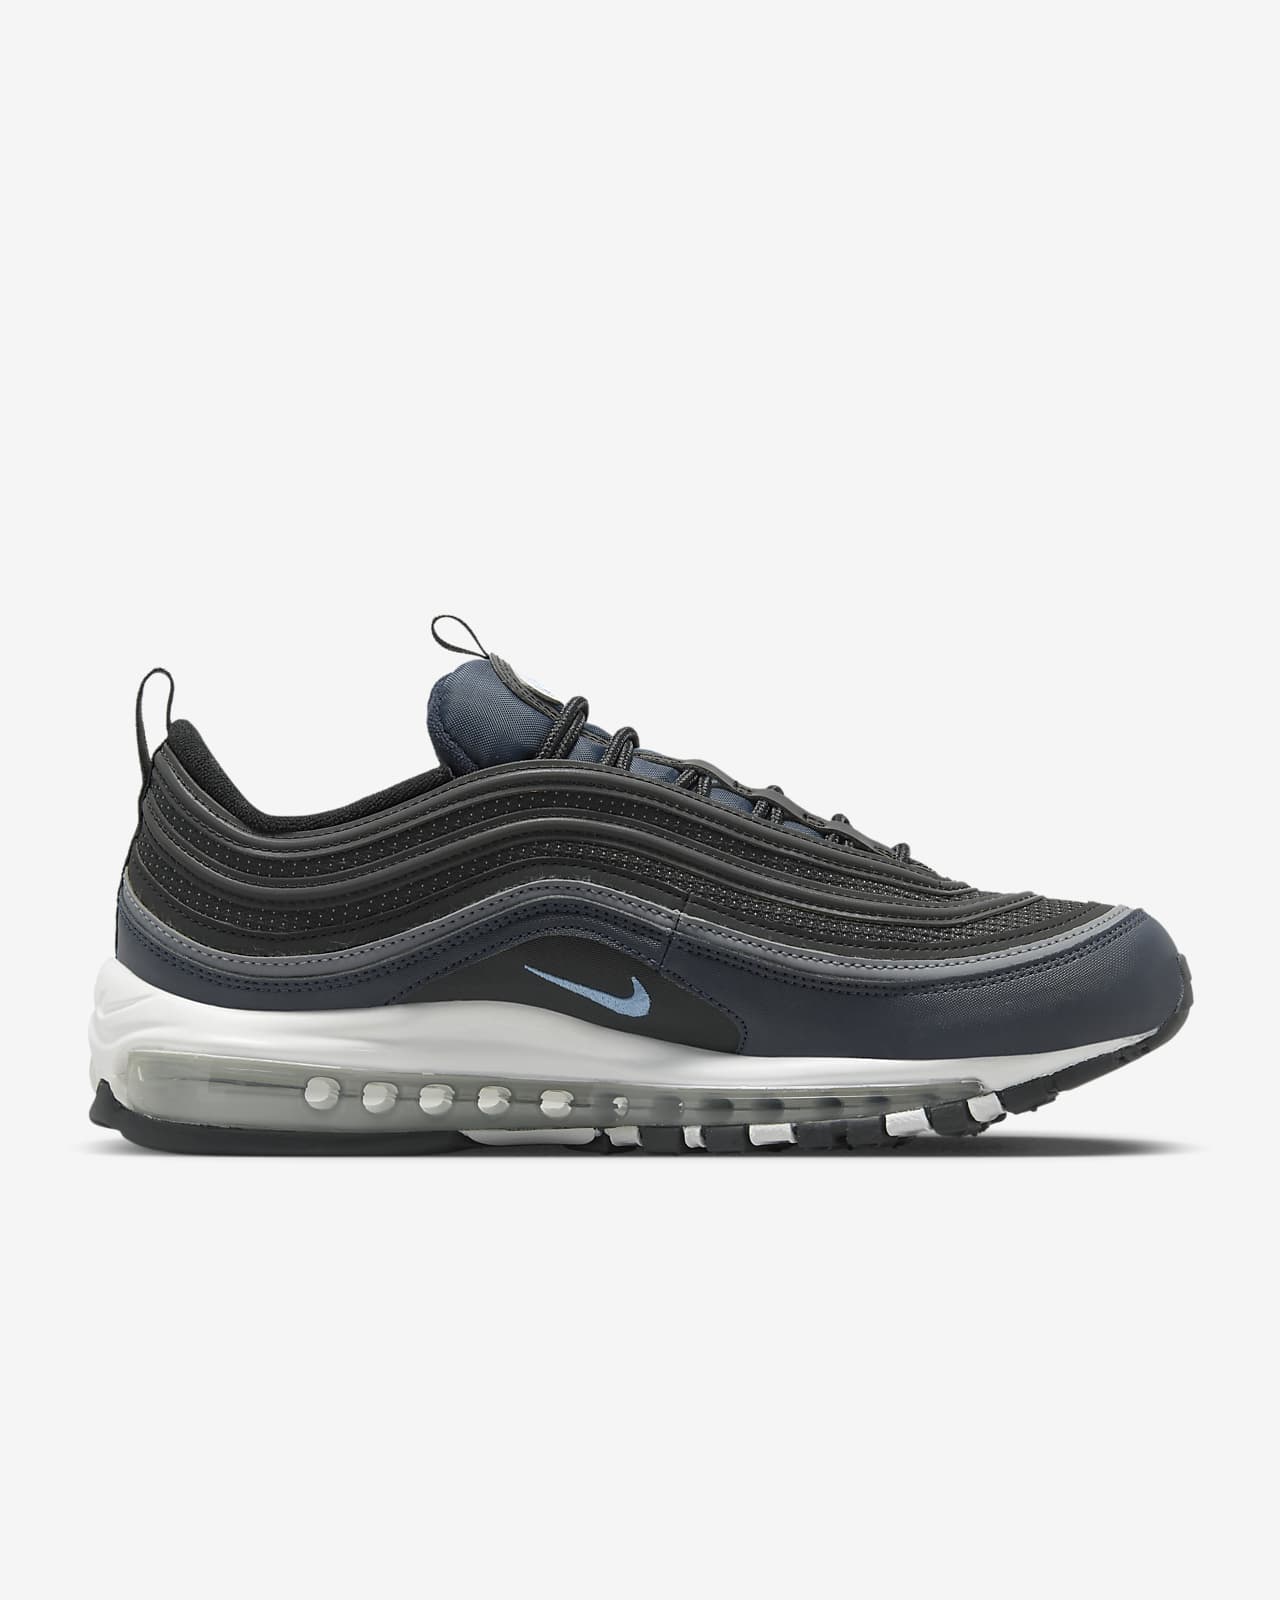 Borrowed climax archive Nike Air Max 97 Men's Shoes. Nike.com